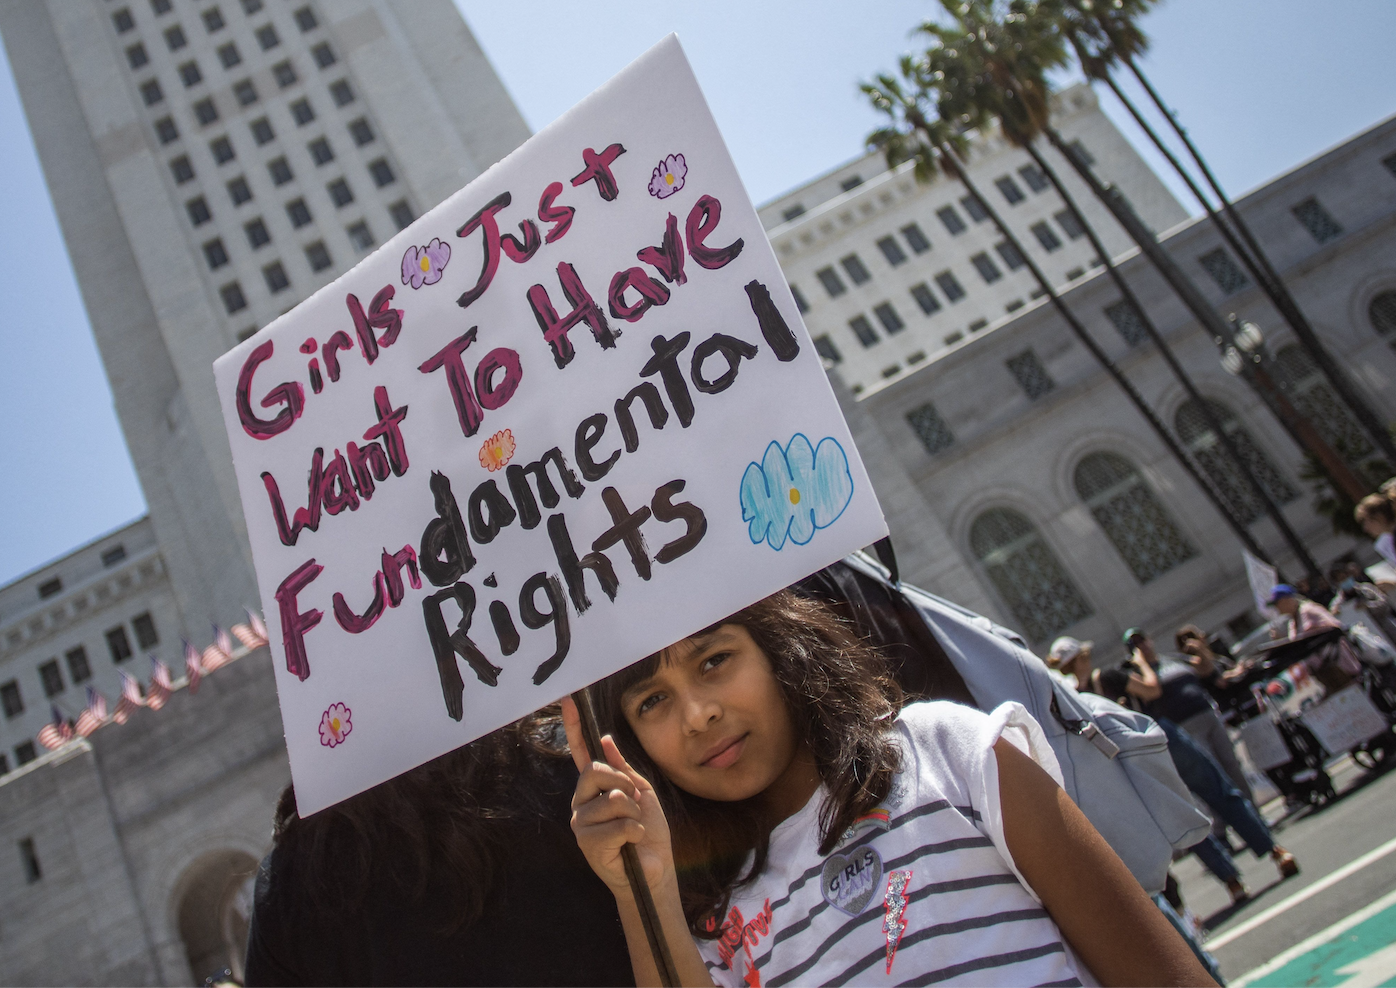 A young girl holding up a protest sign that says &quot;Girls just want to have fundamental rights.&quot;